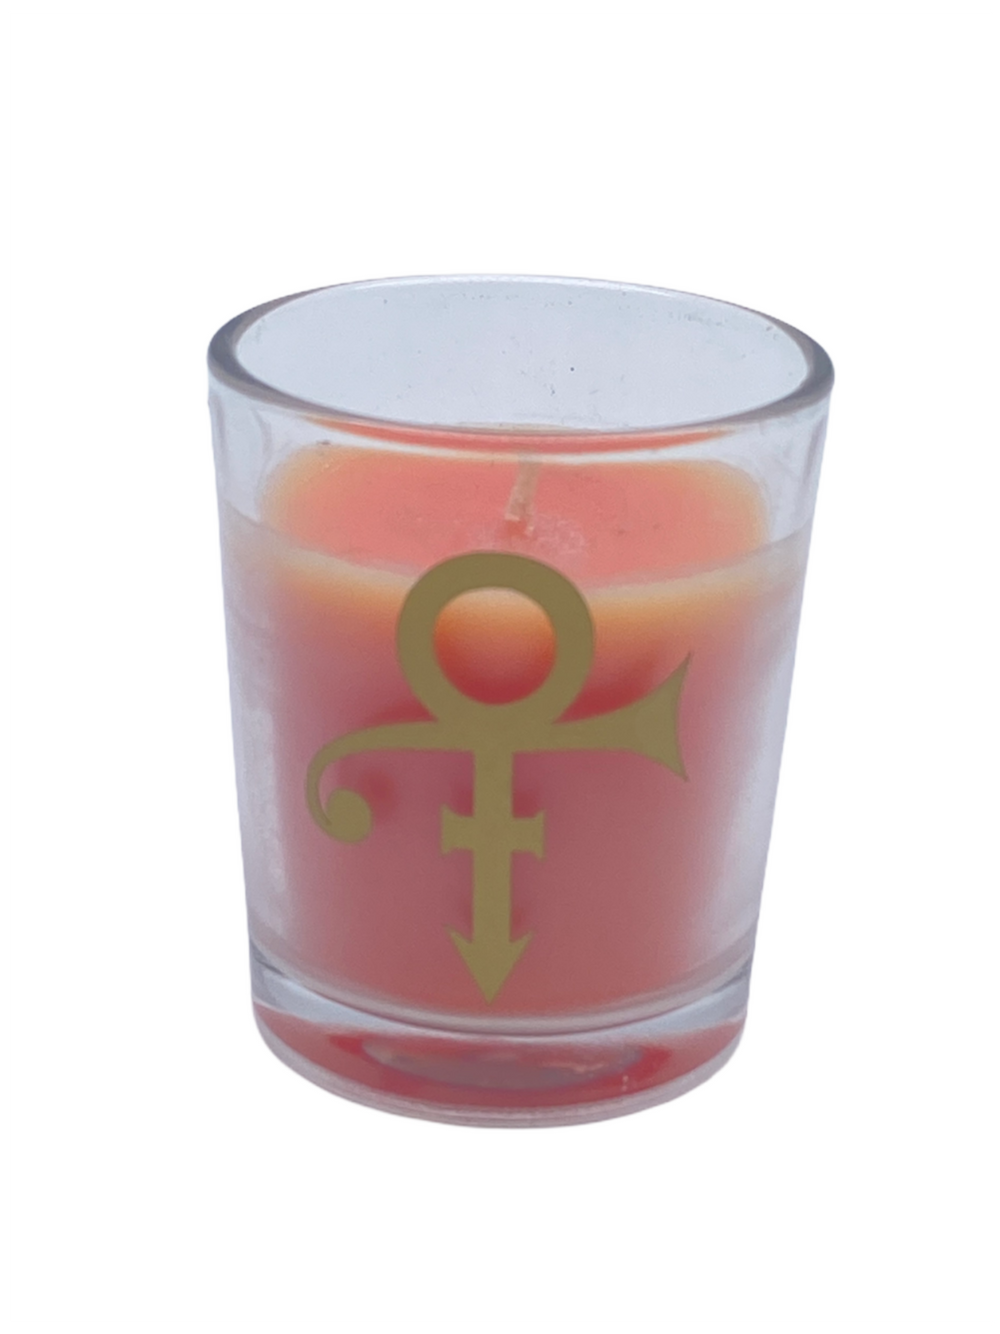 Original NPG Store Official Merch Small Candle In Holder Gold Love Symbol Prince Peach